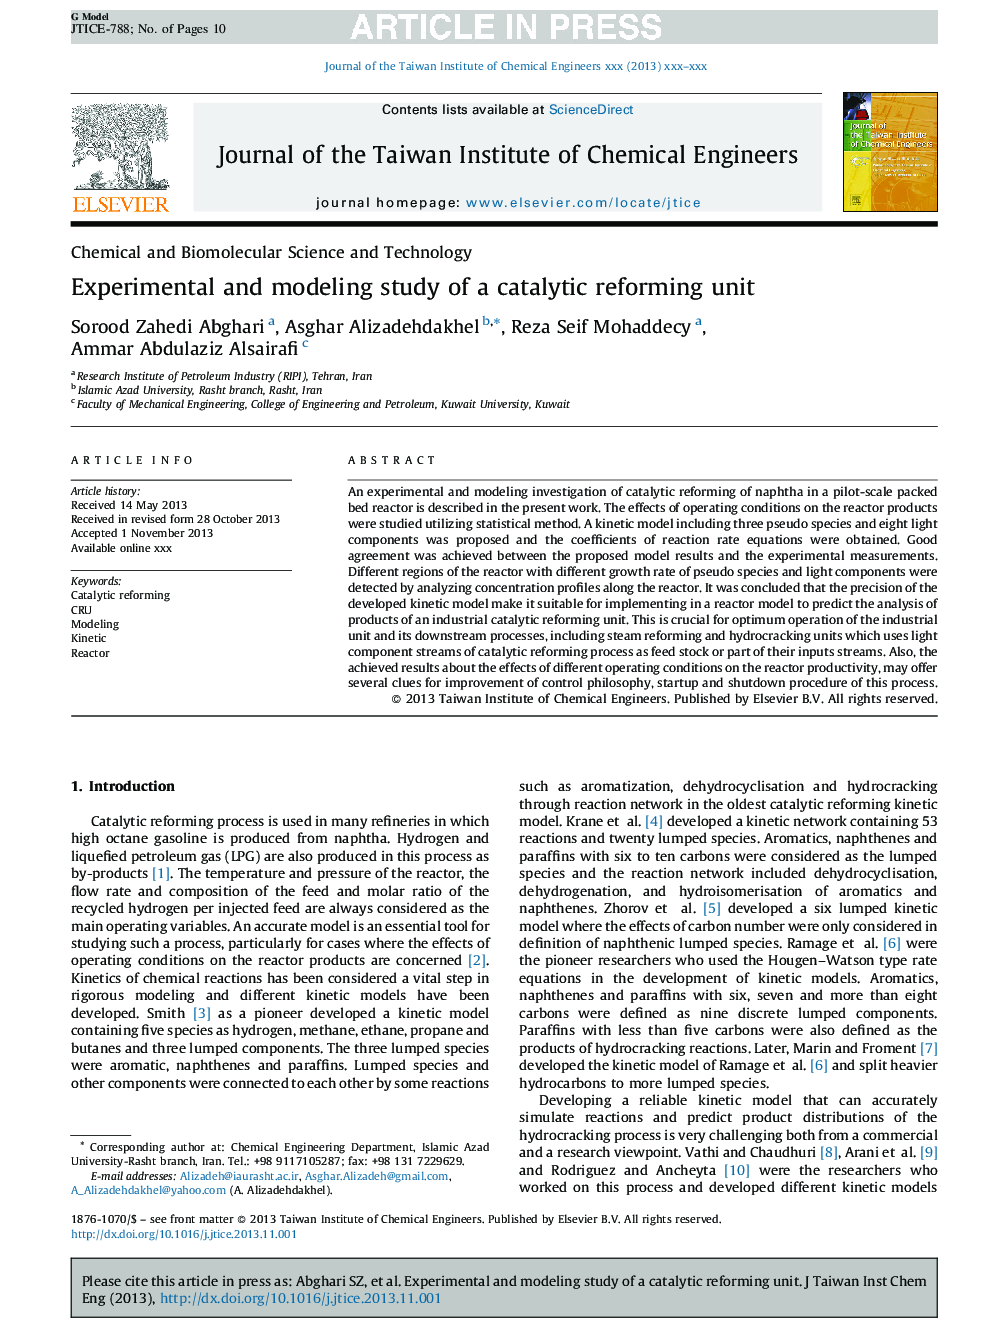 Experimental and modeling study of a catalytic reforming unit